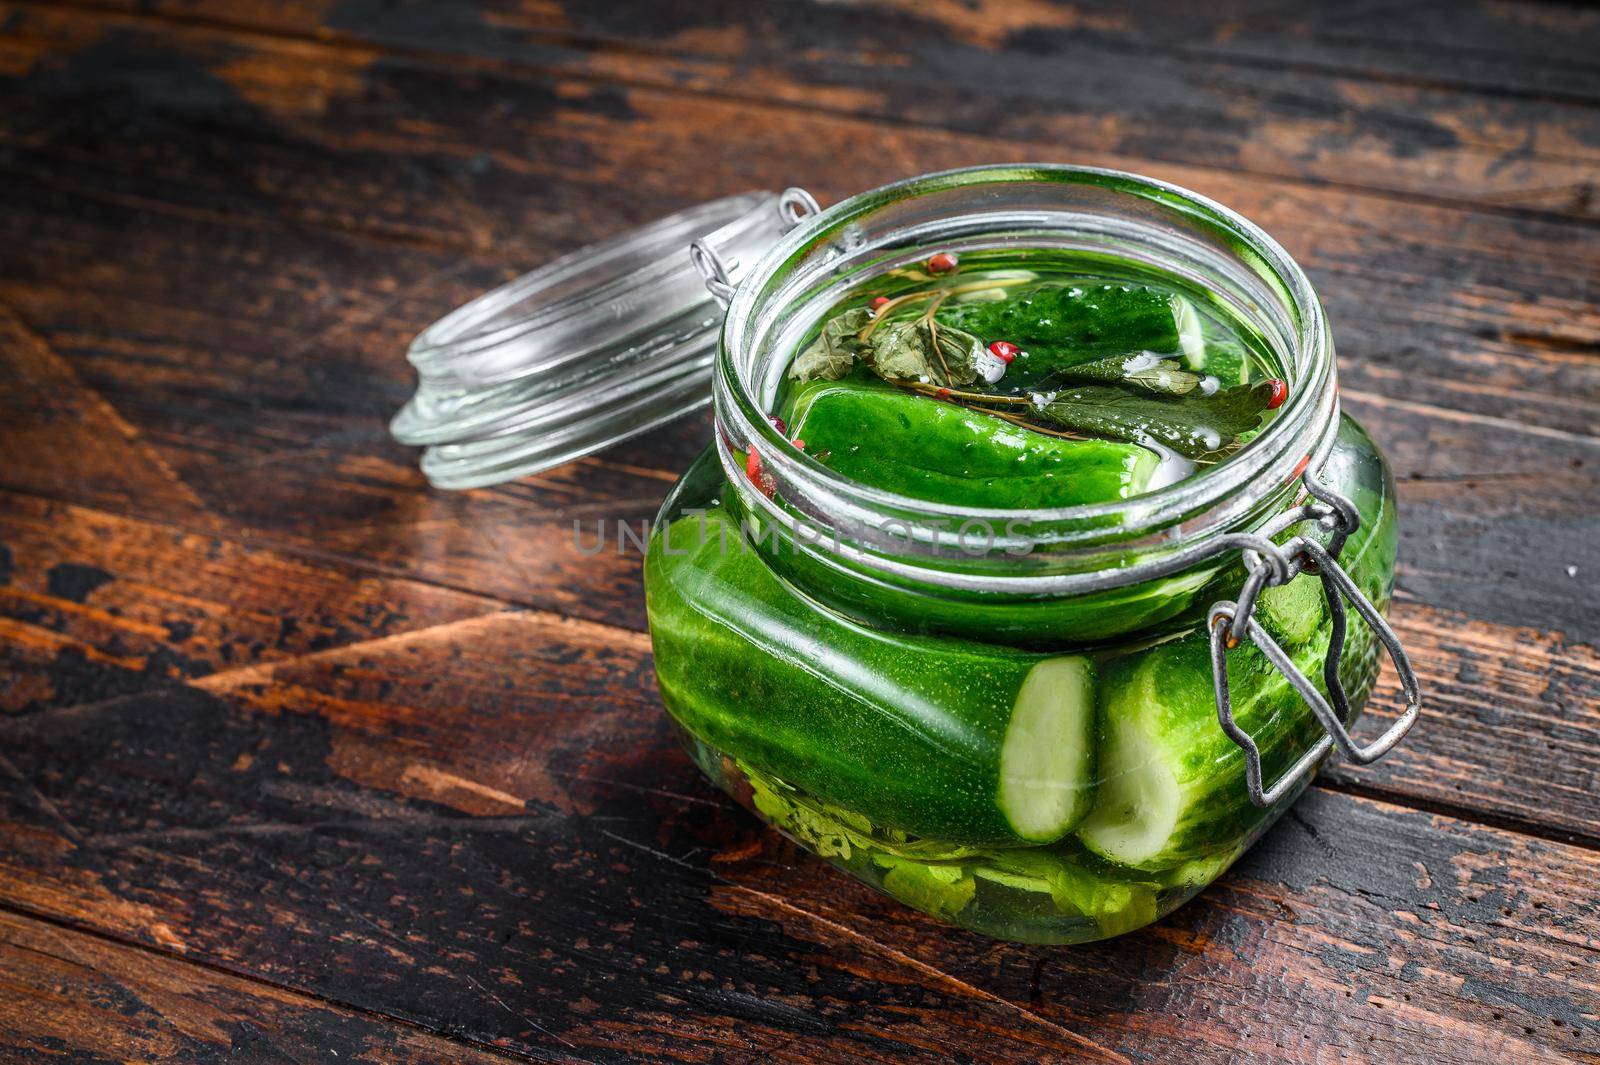 Green salted cucumbers in a glass jar. Canned vegetables. Dark Wooden background. Top view